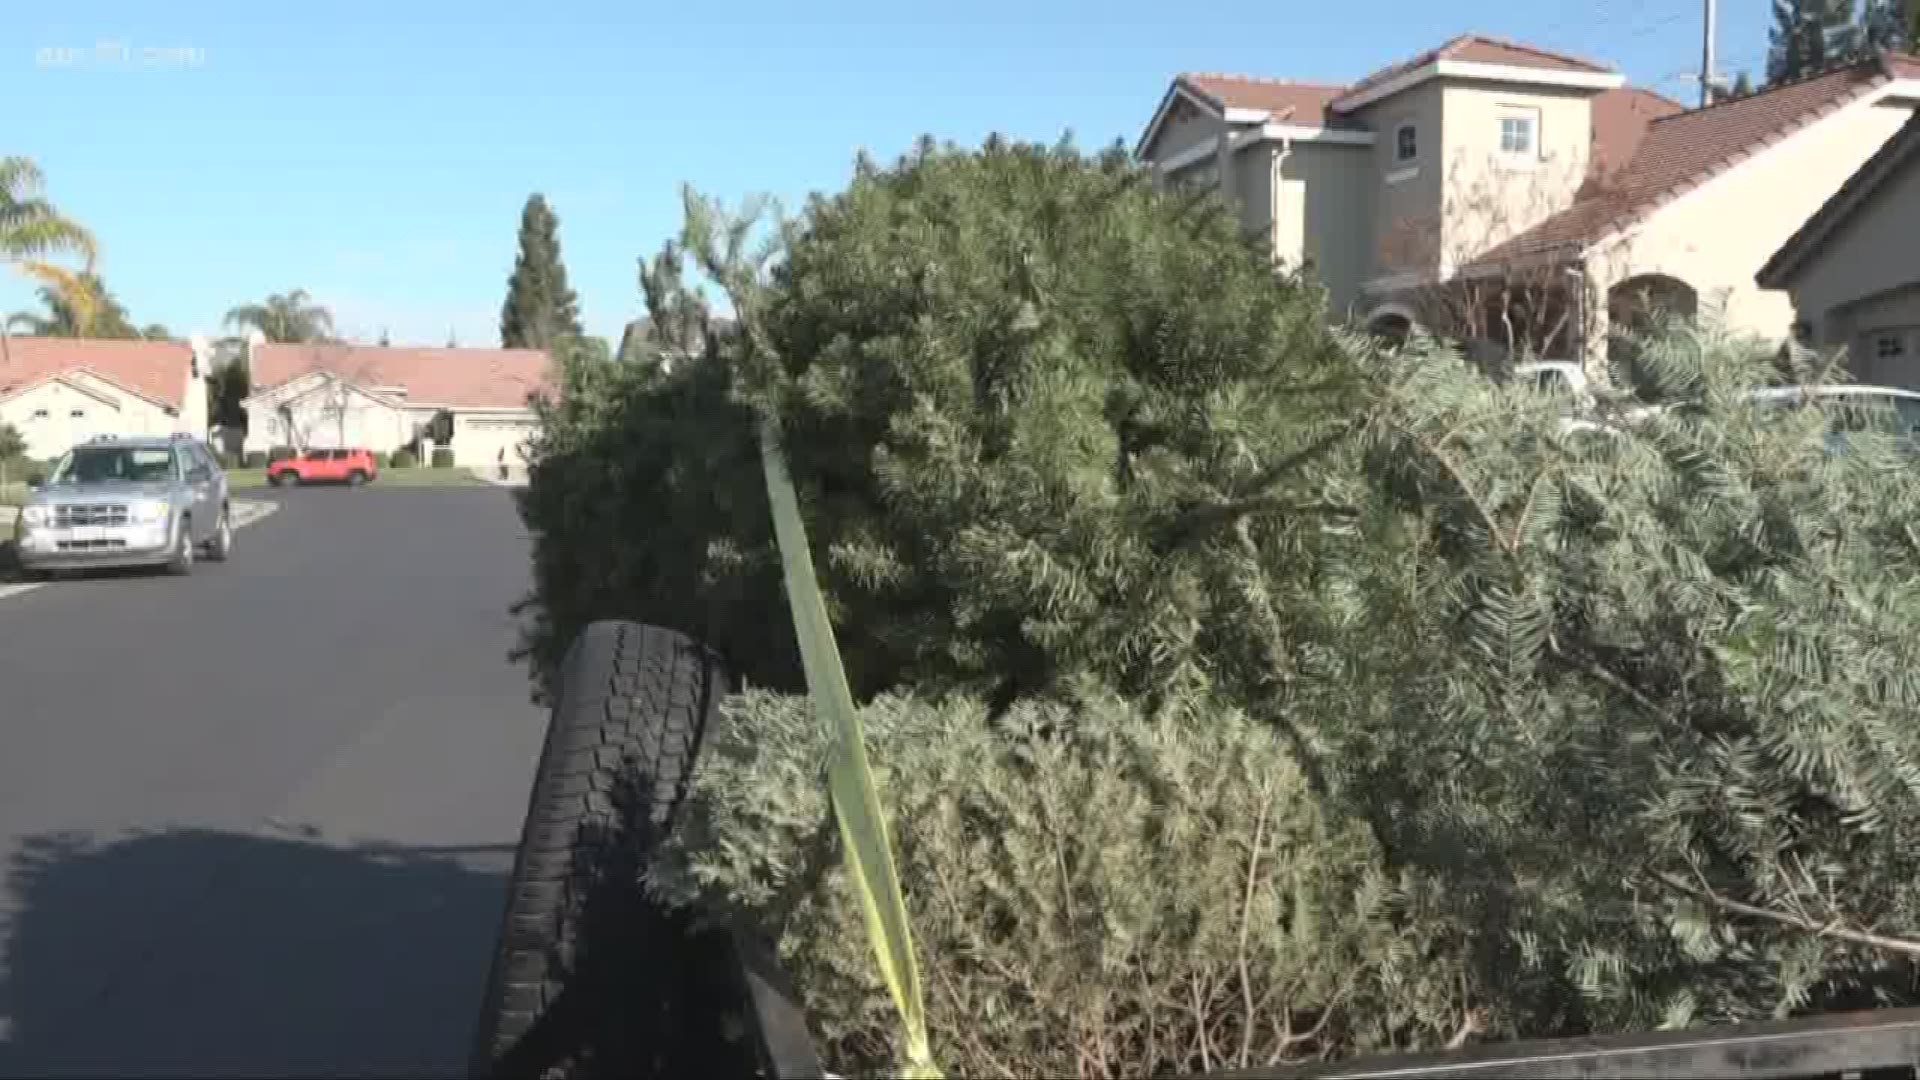 More than 100 Boy Scouts went through every neighborhood in Roseville to find discarded Christmas trees.